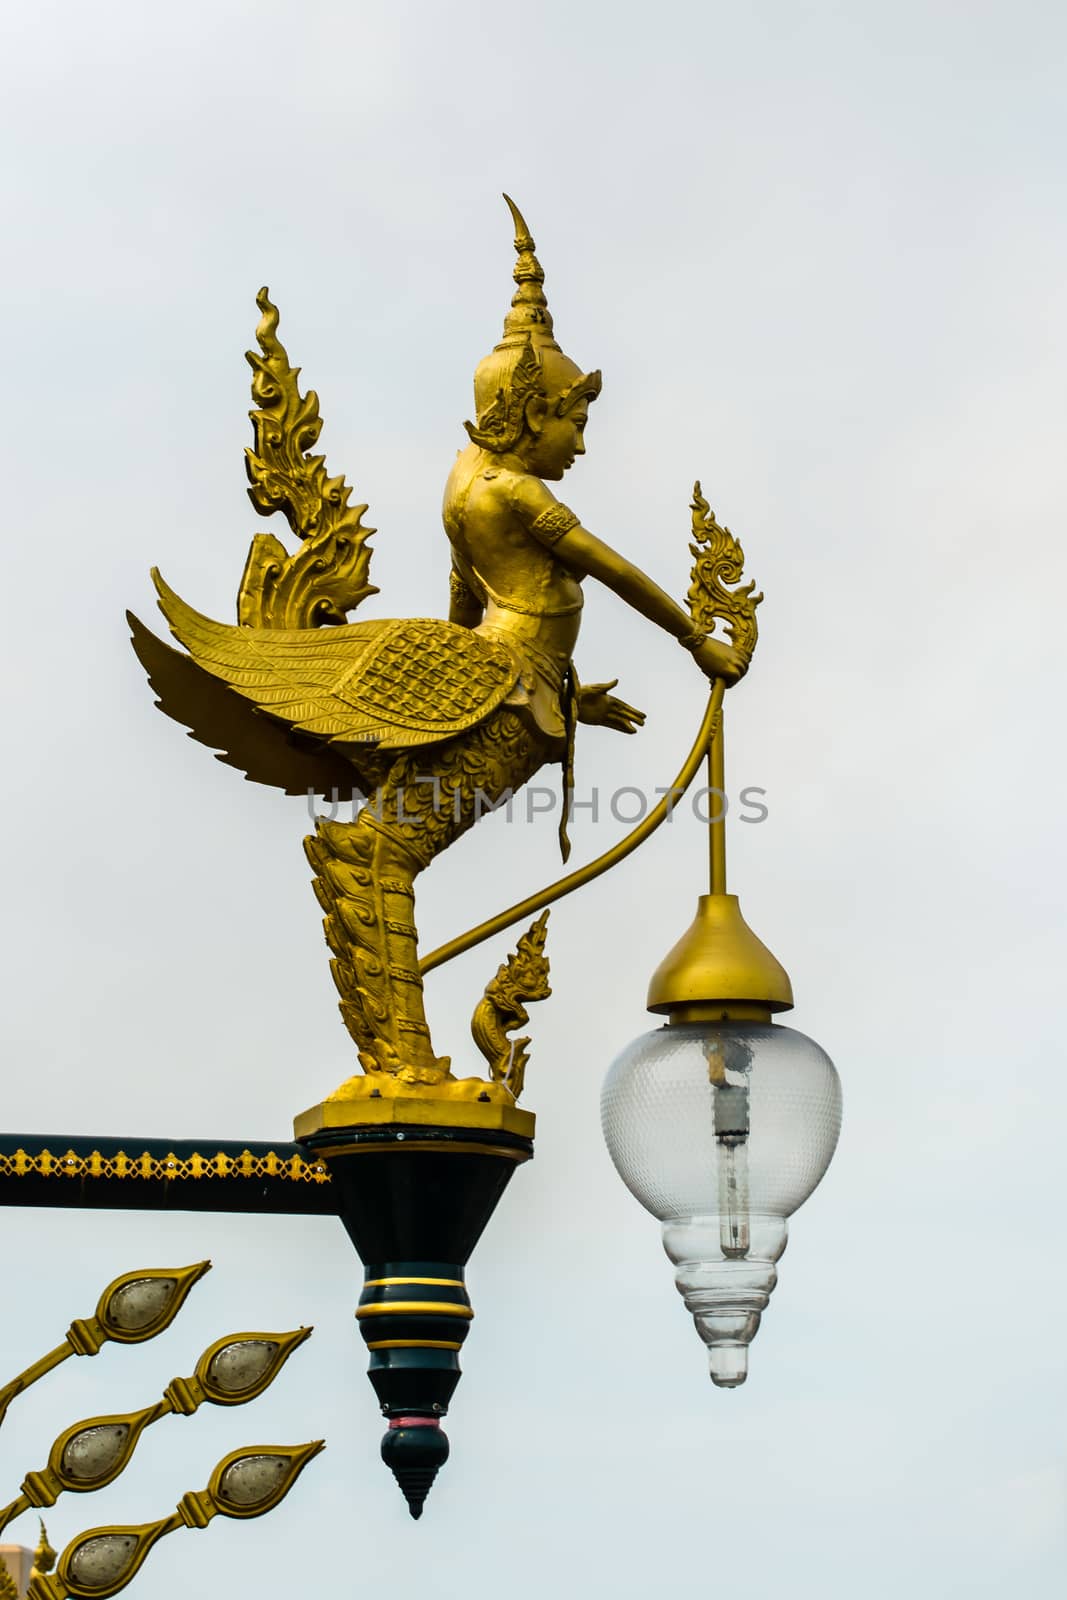 the gold colour lamp in thai style by golengstock